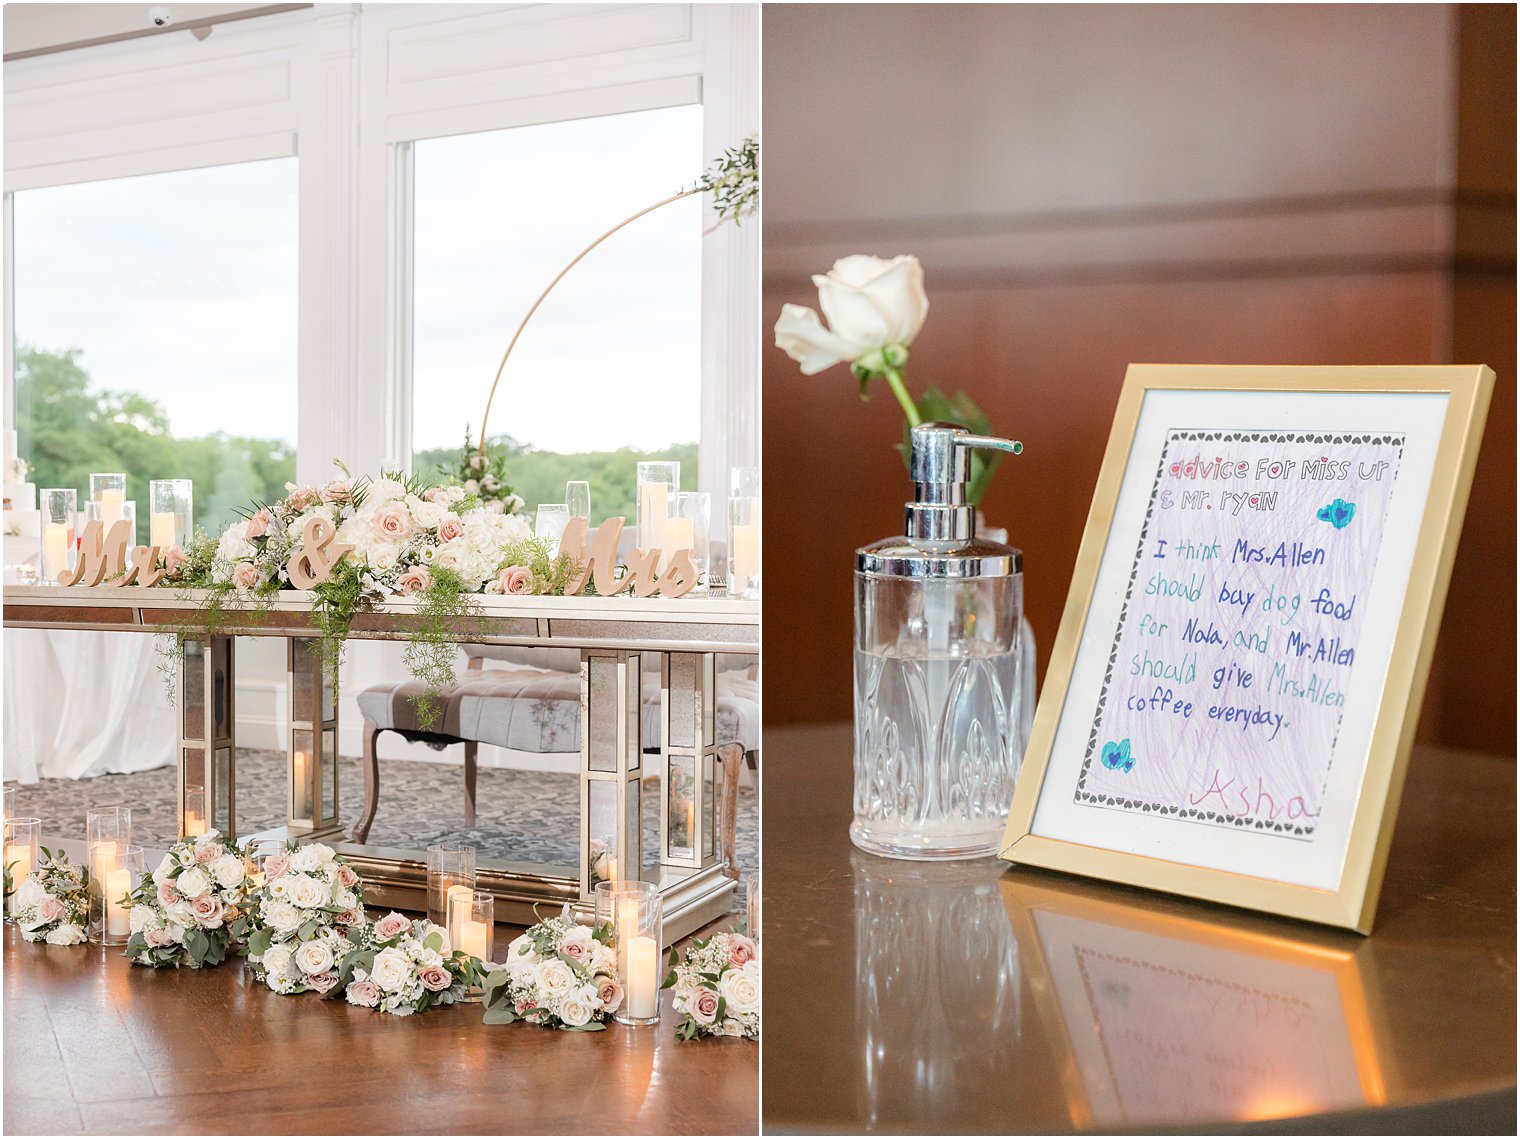 sweetheart table and handwritten note from kid